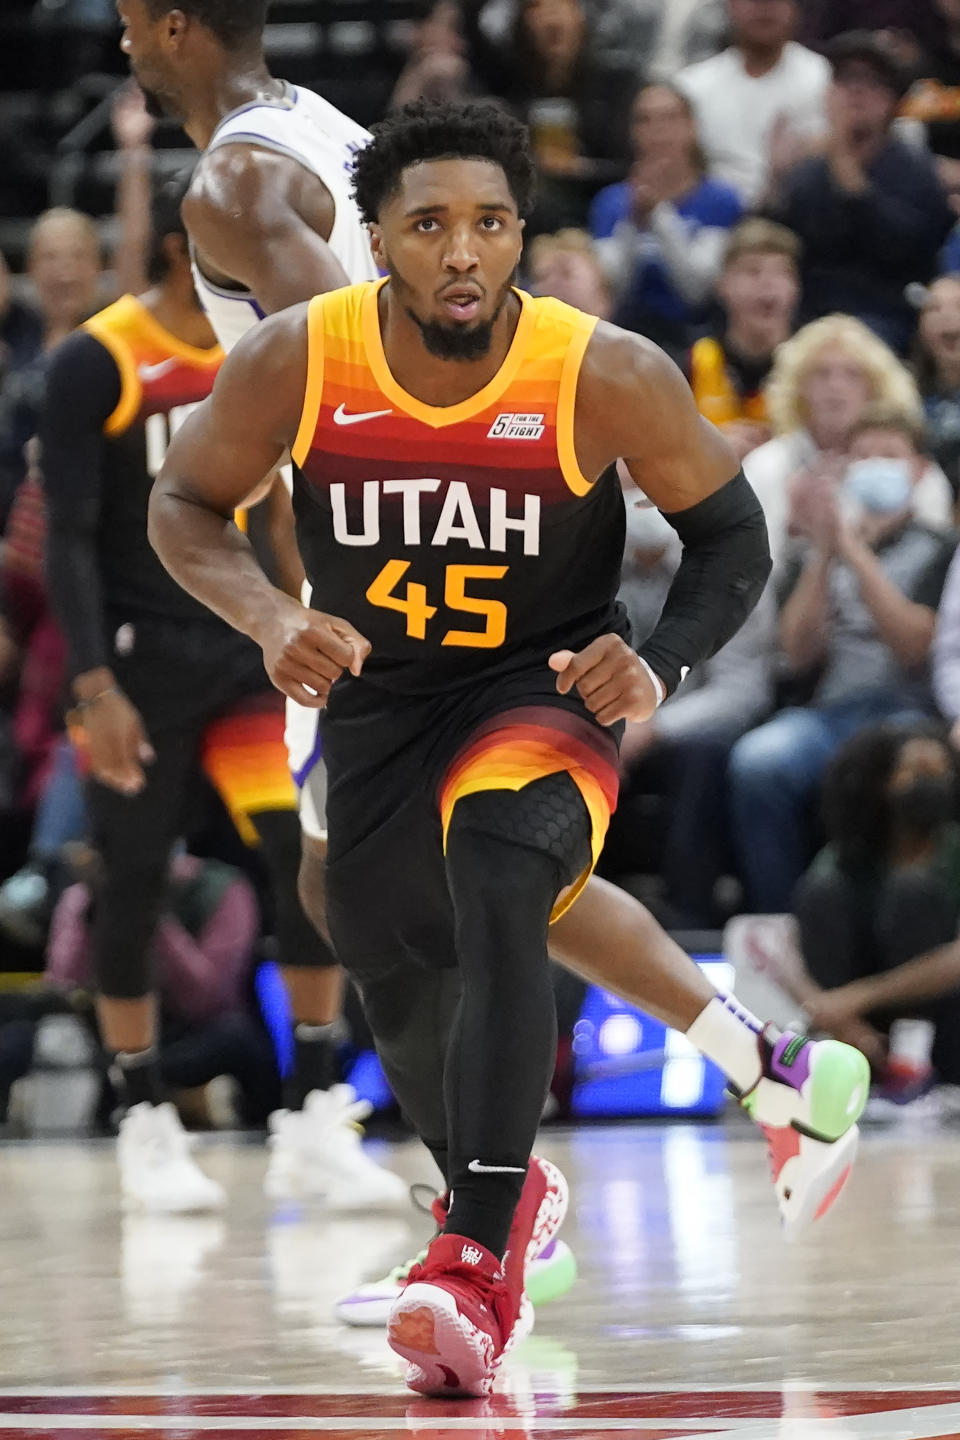 Utah Jazz guard Donovan Mitchell (45) runs up court after making a 3-pointer against the Sacramento Kings in the first half during an NBA basketball game Tuesday, Nov. 2, 2021, in Salt Lake City. (AP Photo/Rick Bowmer)